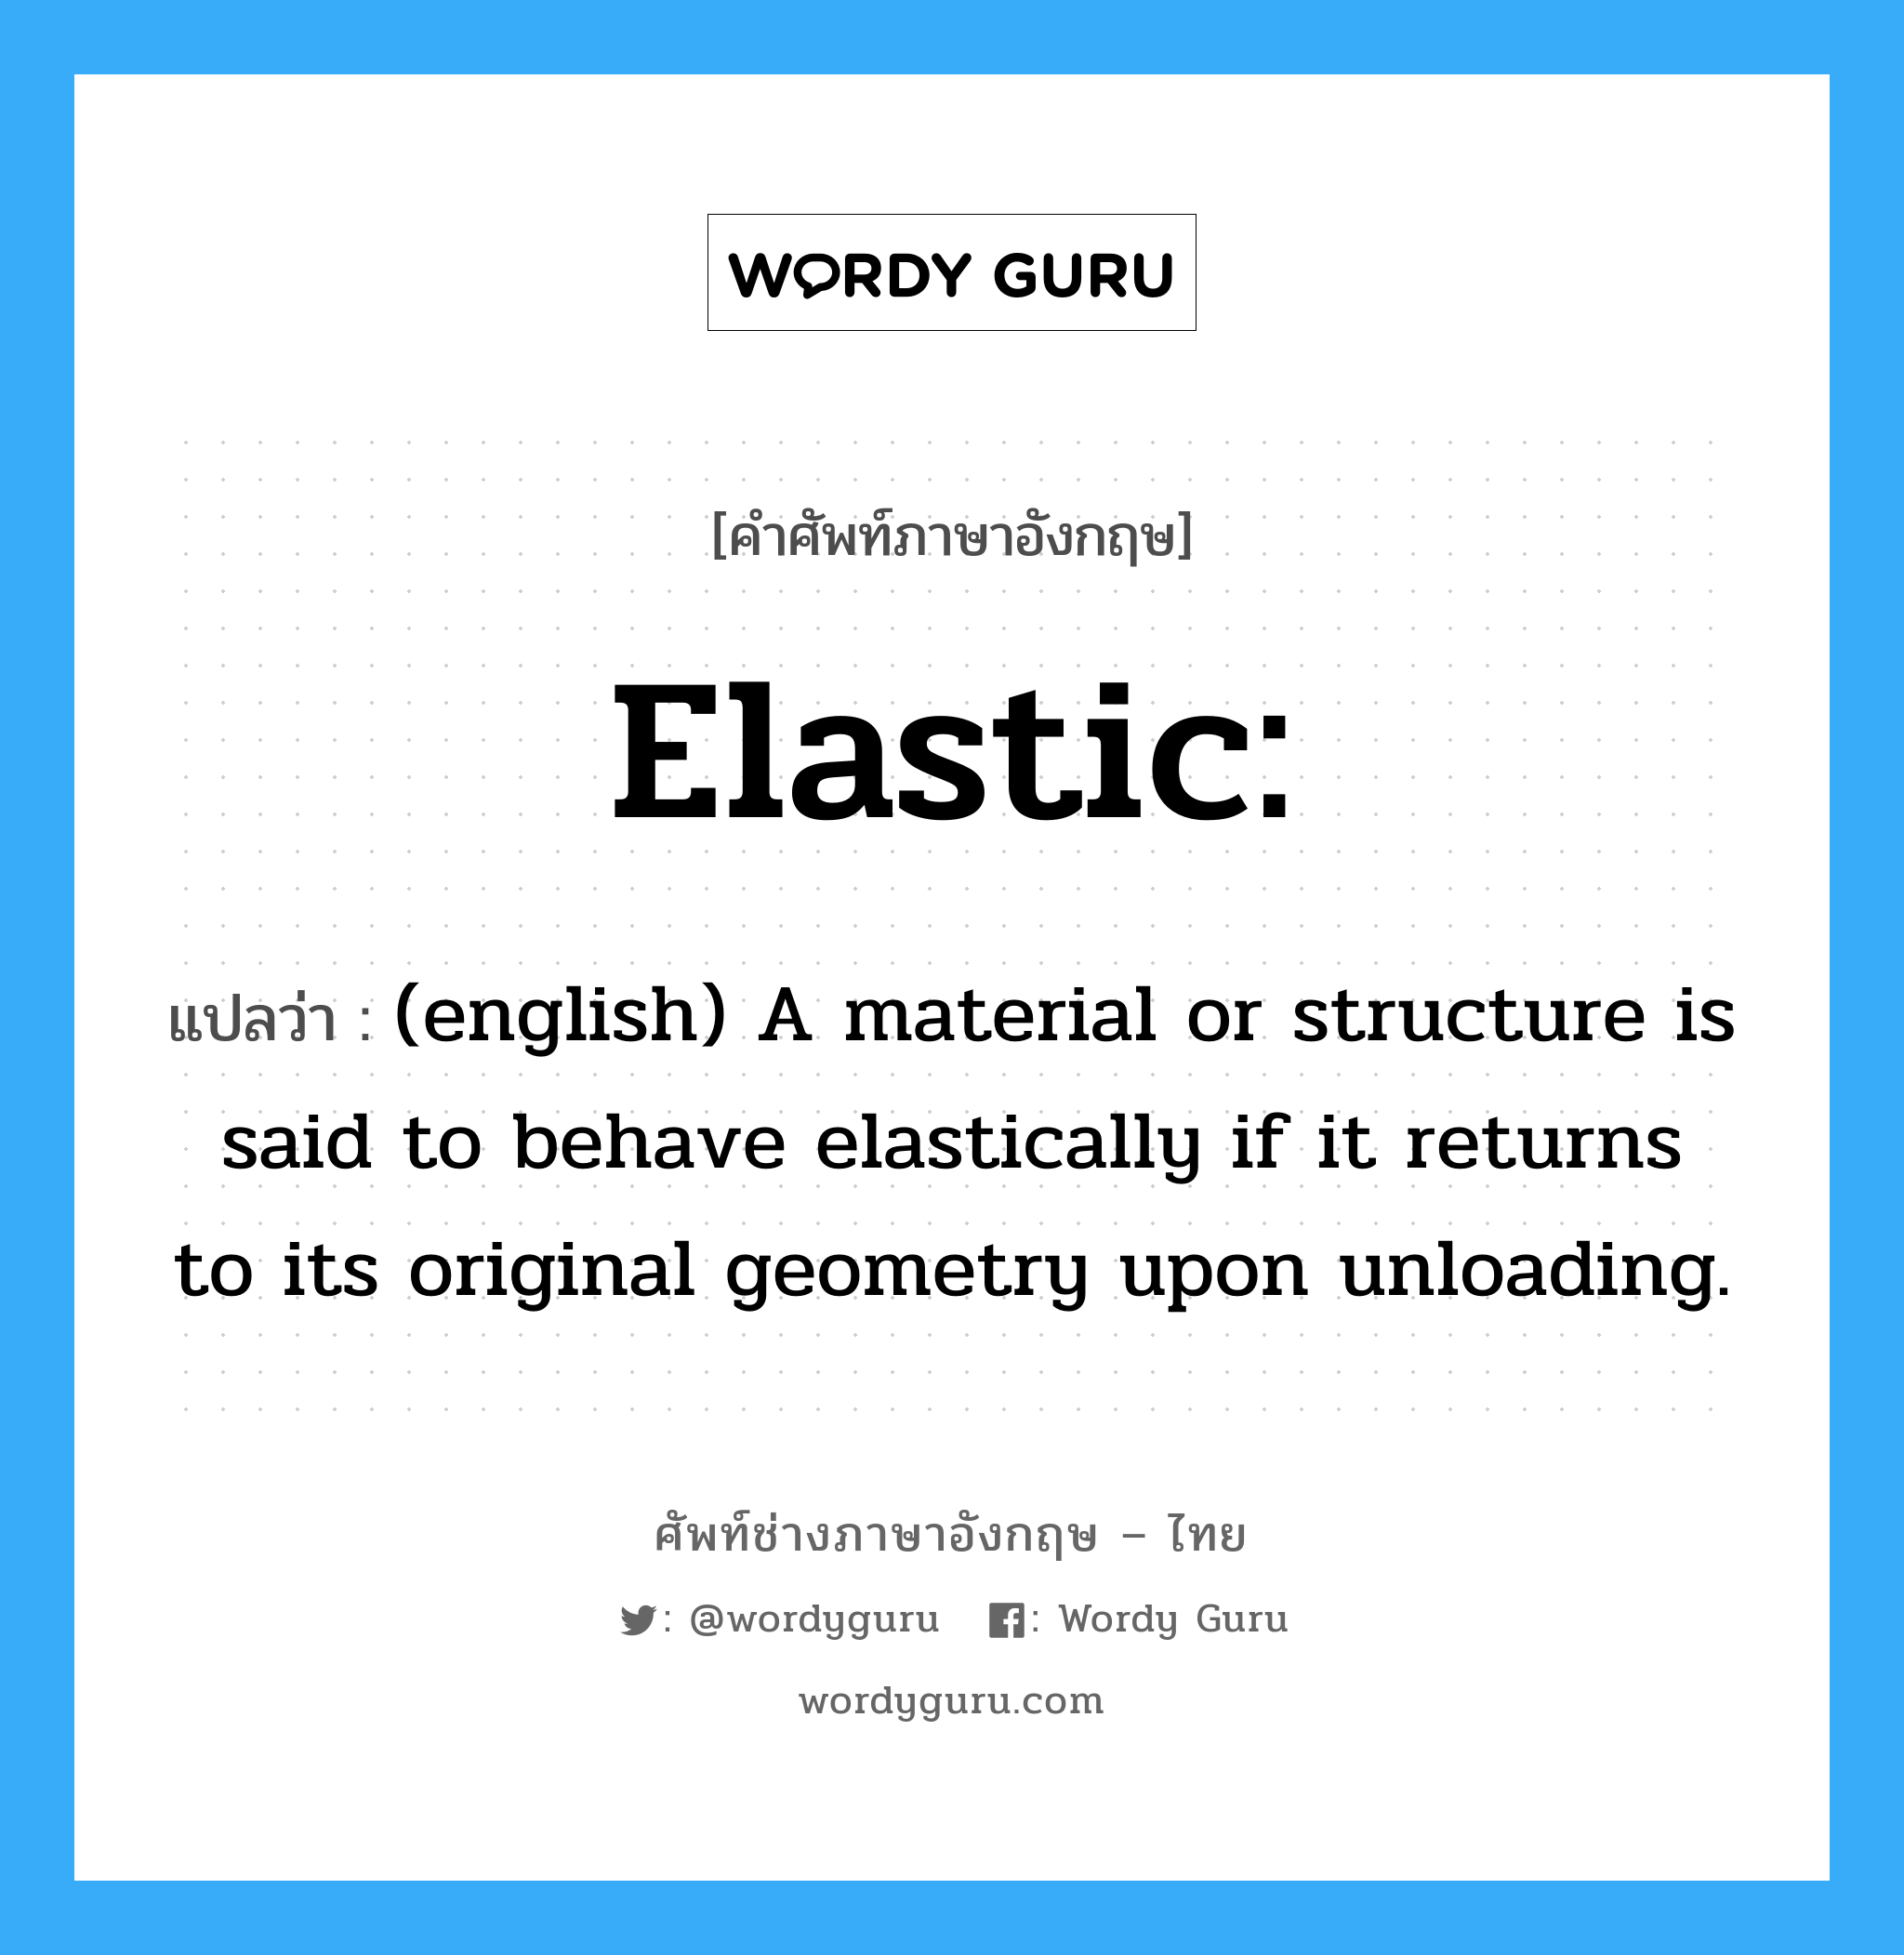 (english) A material or structure is said to behave elastically if it returns to its original geometry upon unloading. ภาษาอังกฤษ?, คำศัพท์ช่างภาษาอังกฤษ - ไทย (english) A material or structure is said to behave elastically if it returns to its original geometry upon unloading. คำศัพท์ภาษาอังกฤษ (english) A material or structure is said to behave elastically if it returns to its original geometry upon unloading. แปลว่า Elastic: